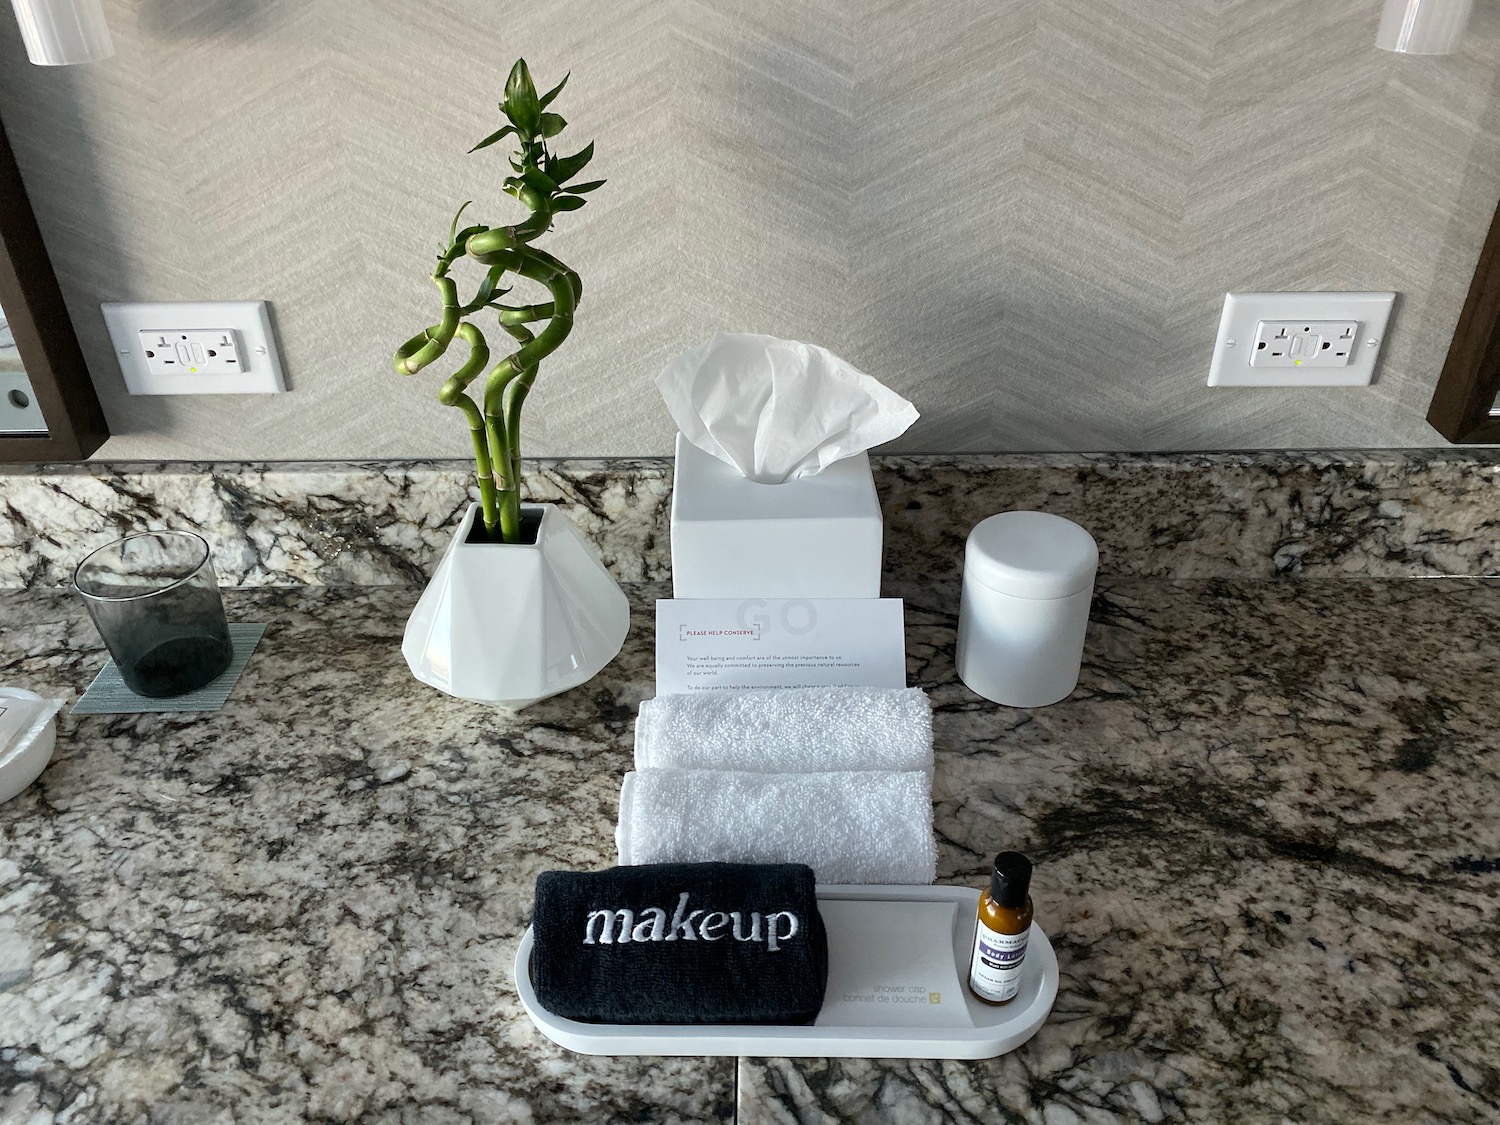 a bathroom counter with a towel and a plant